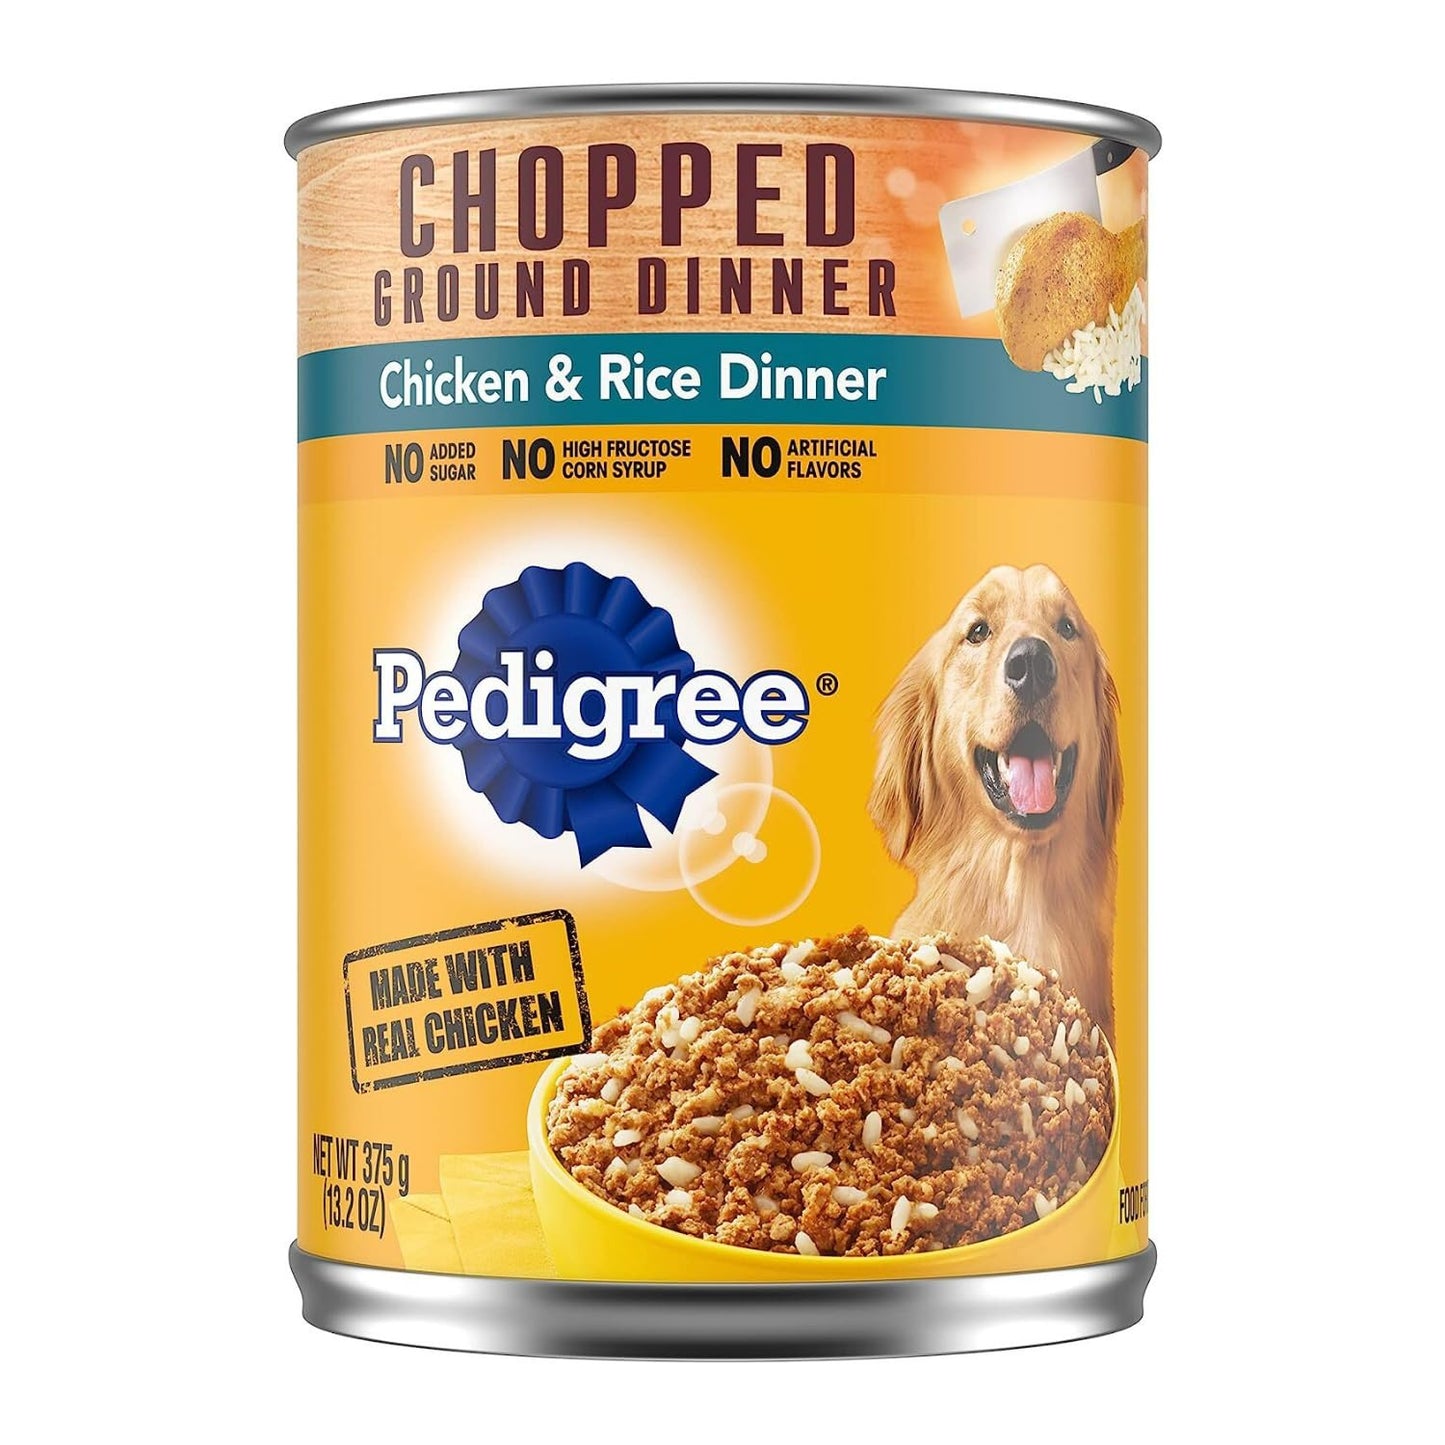 Pedigree Chopped Ground Dinner Chicken & Rice Canned Dog Food 13.2 Ounces